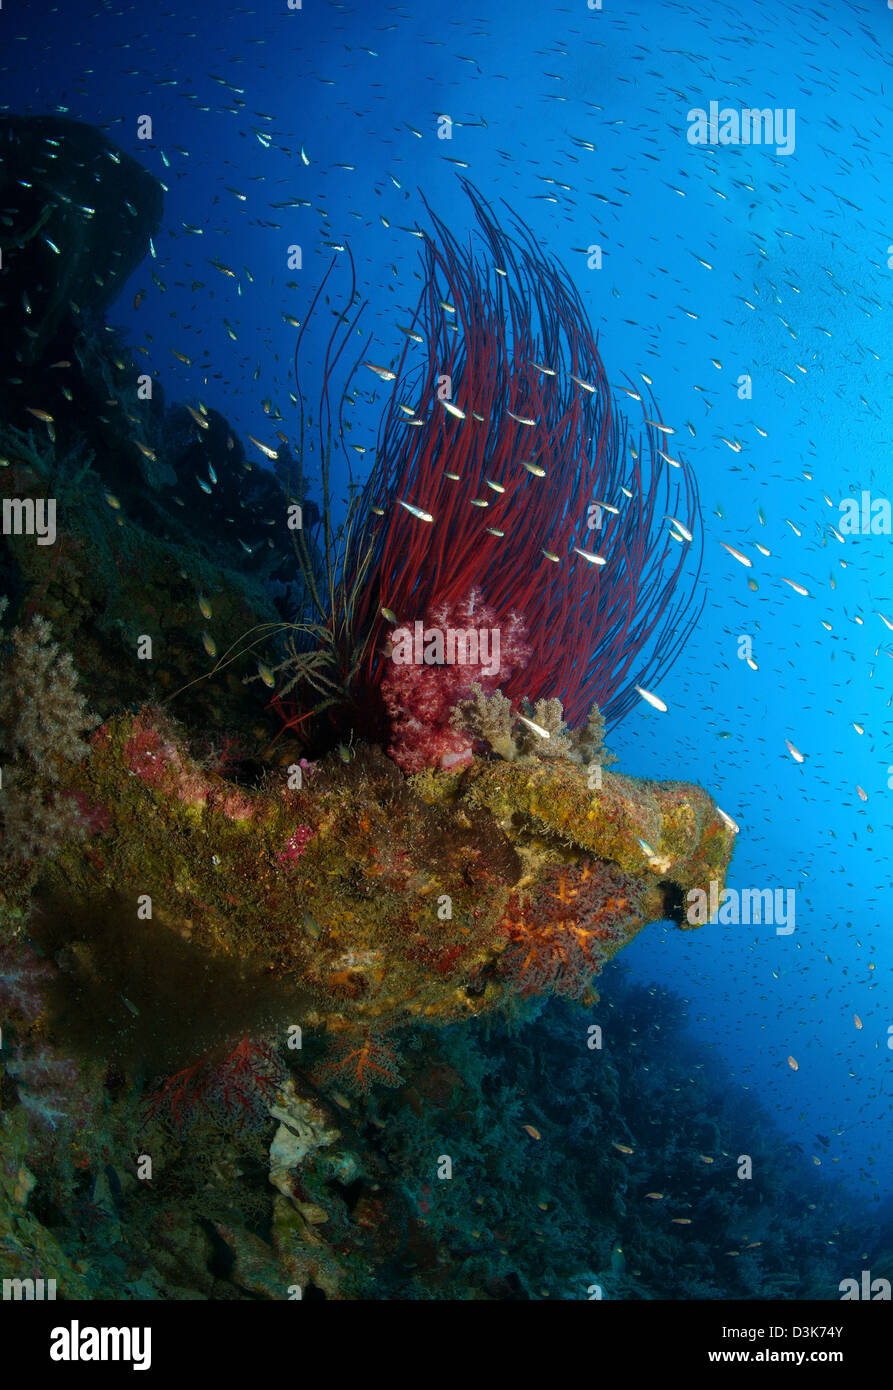 Reef scene with corals and fish, Acasta Reef, Indonesia. Stock Photo